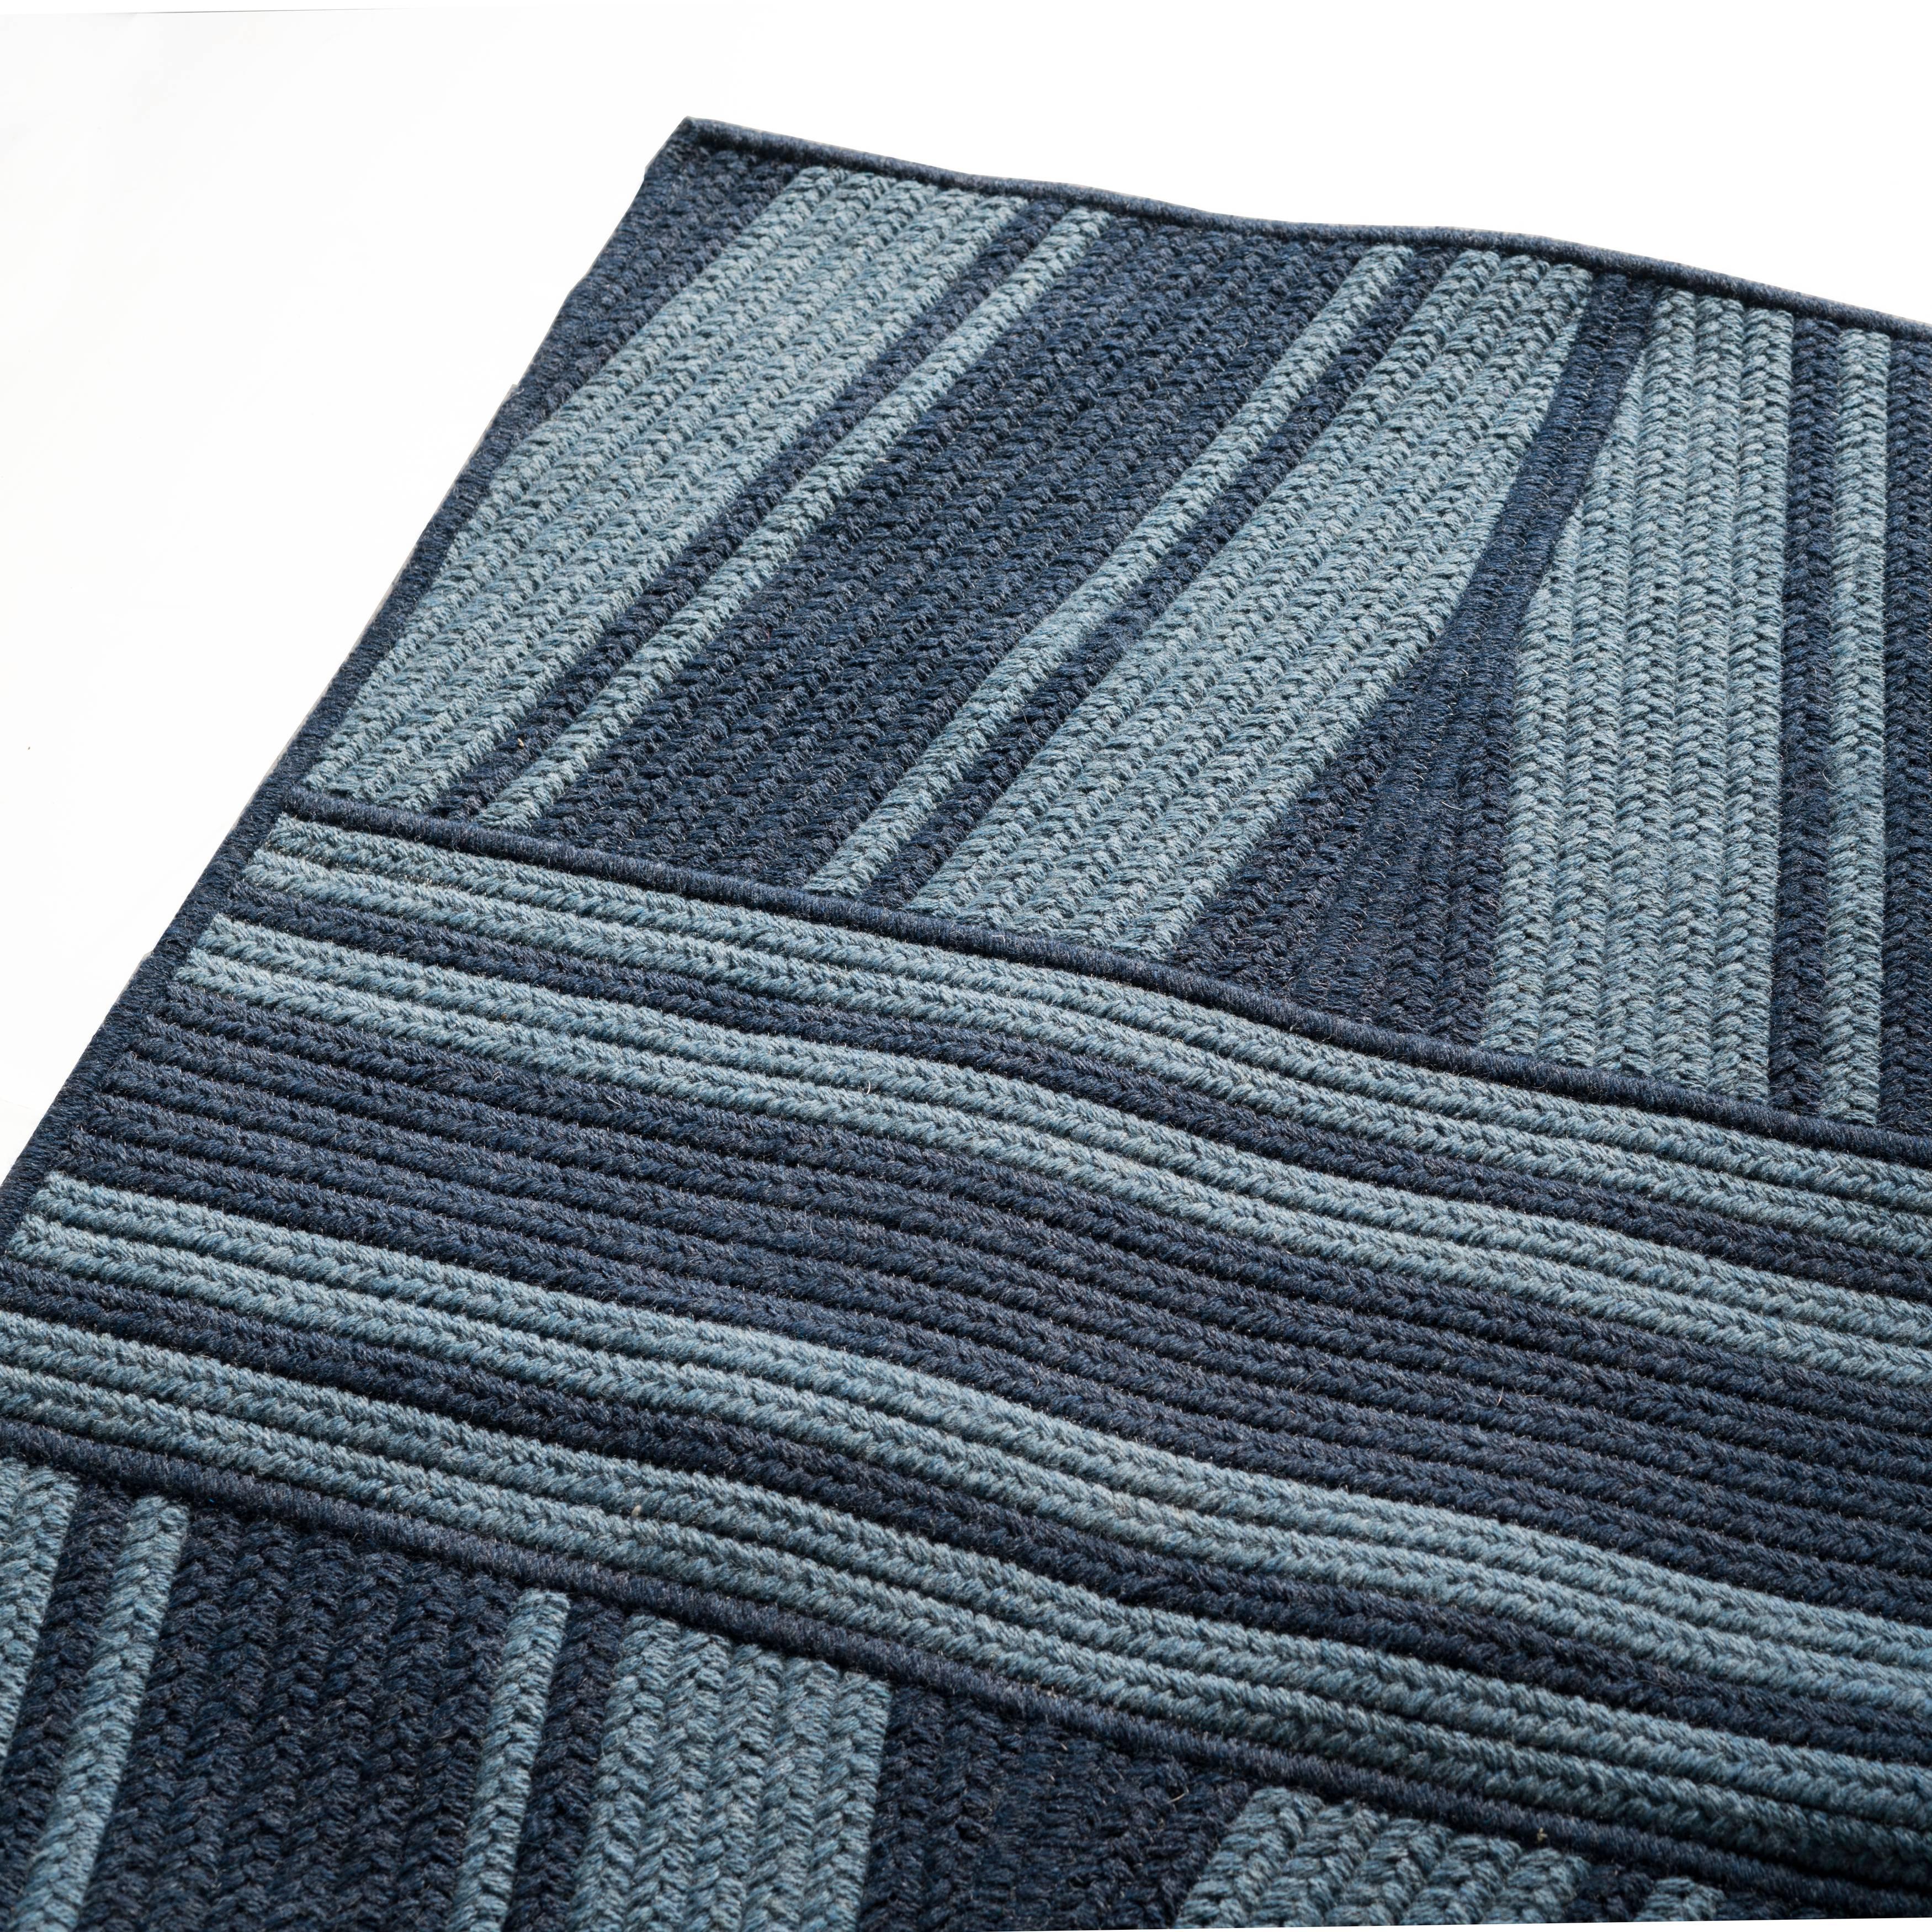 Studio navy wool blend geometric 8' x 10' rectangle Reversible rug. Angled lines and the use of blue and navy wool blend yarns, create a tonal pattern in our navy studio rug.  Designed in the Thayer Design Studio (Best of Houzz Design 2018), and